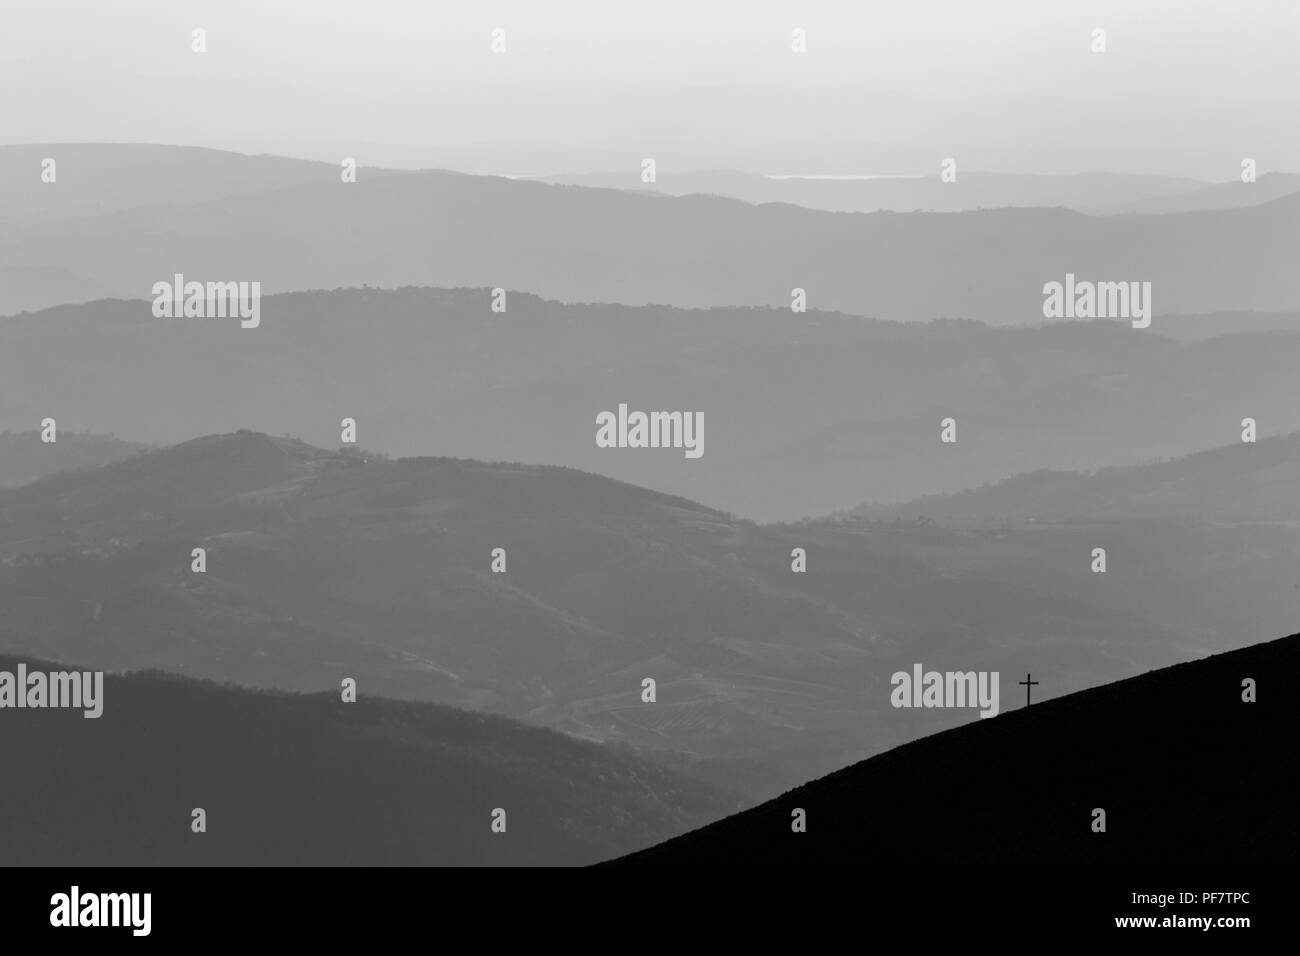 View of a cross on top of a mountain, with various others mountains layers in the background Stock Photo